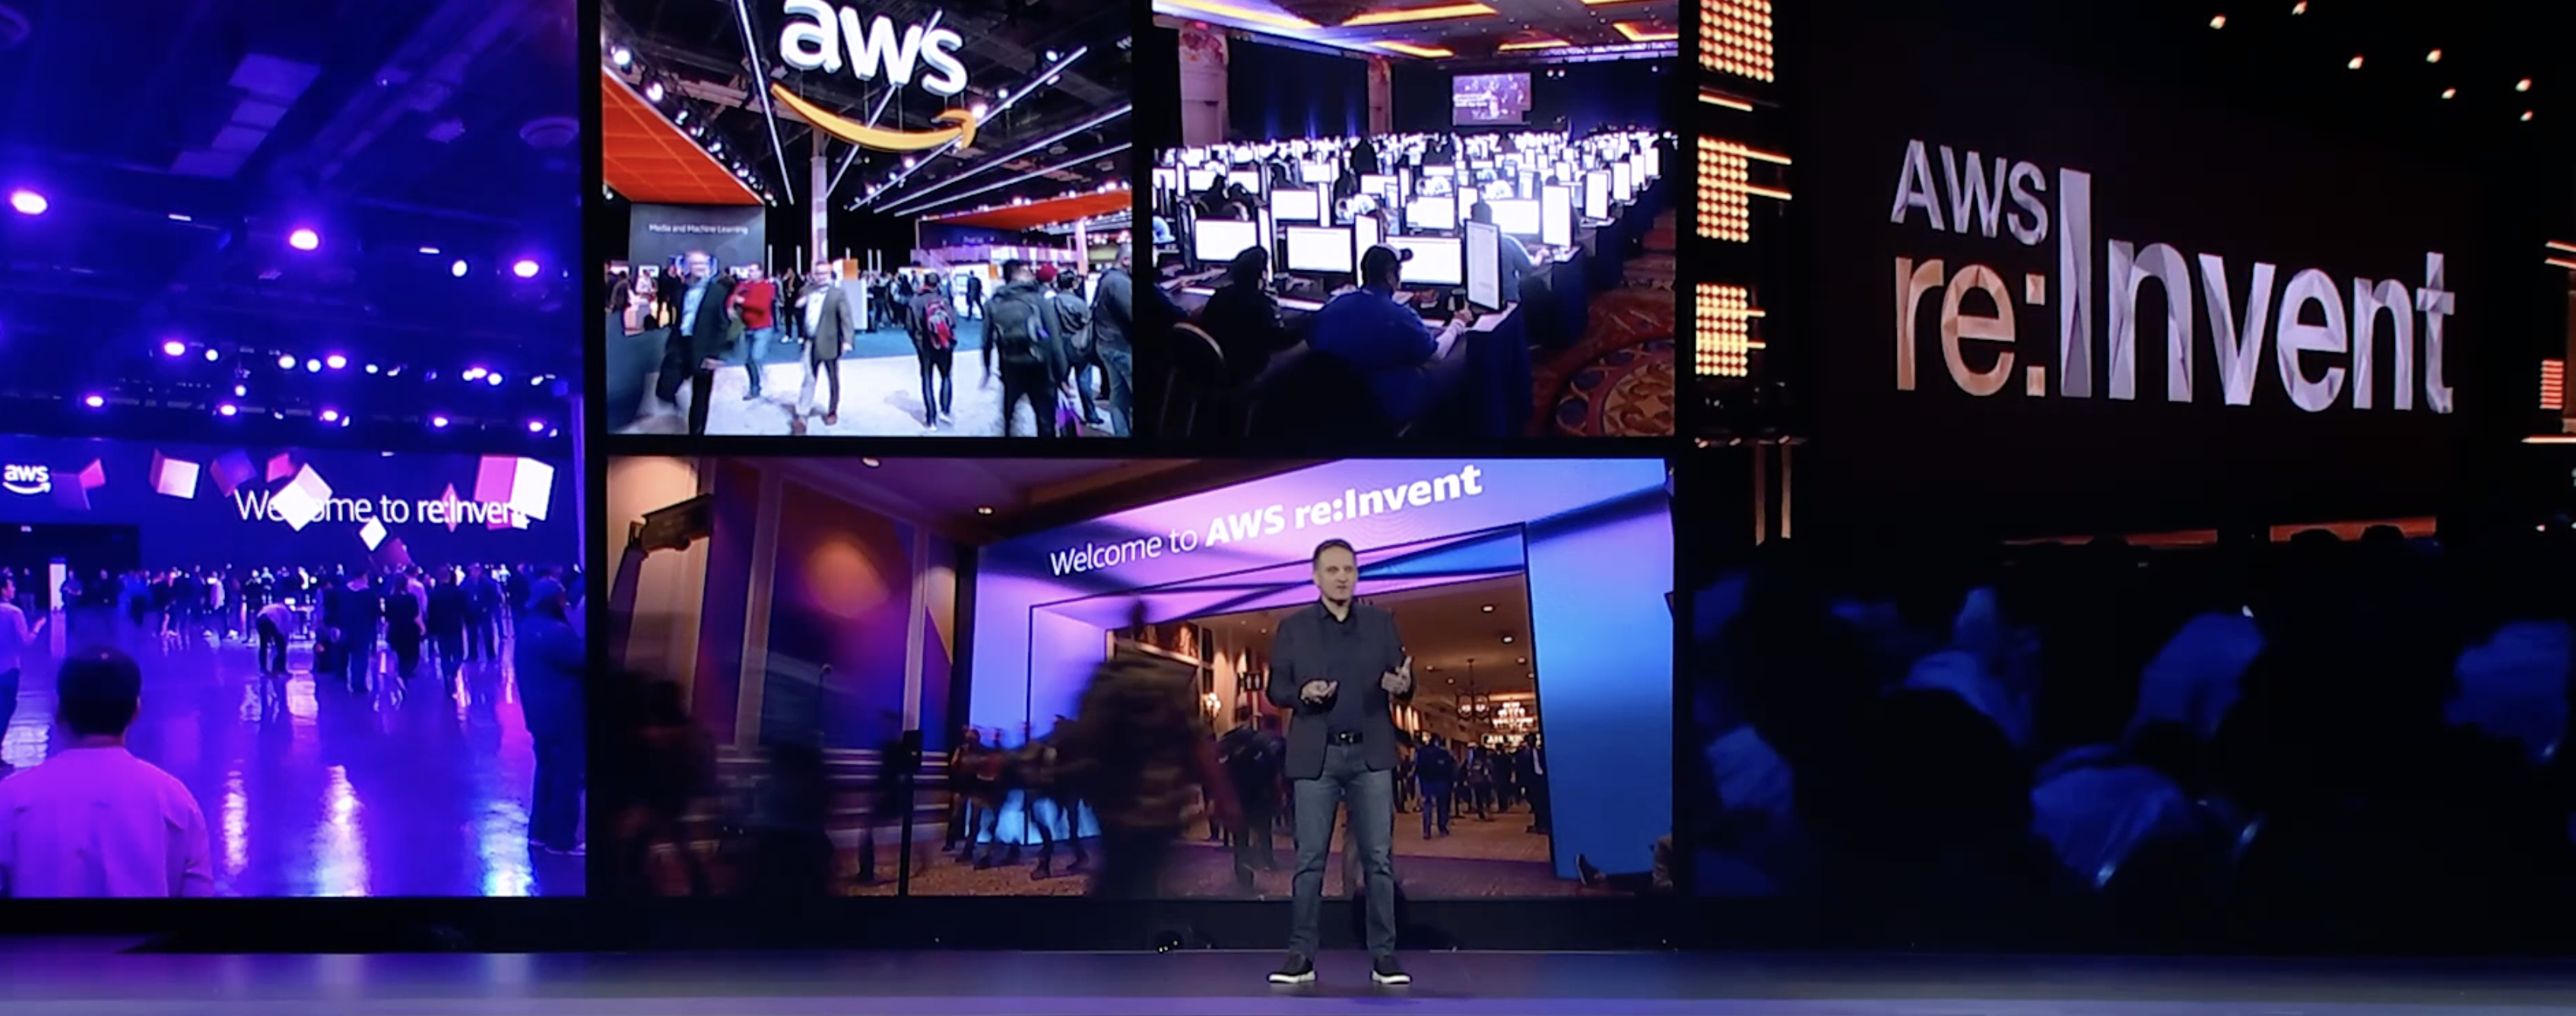 AWS re:Invent picture montage at re:Invent 2022 in Las Vegas.